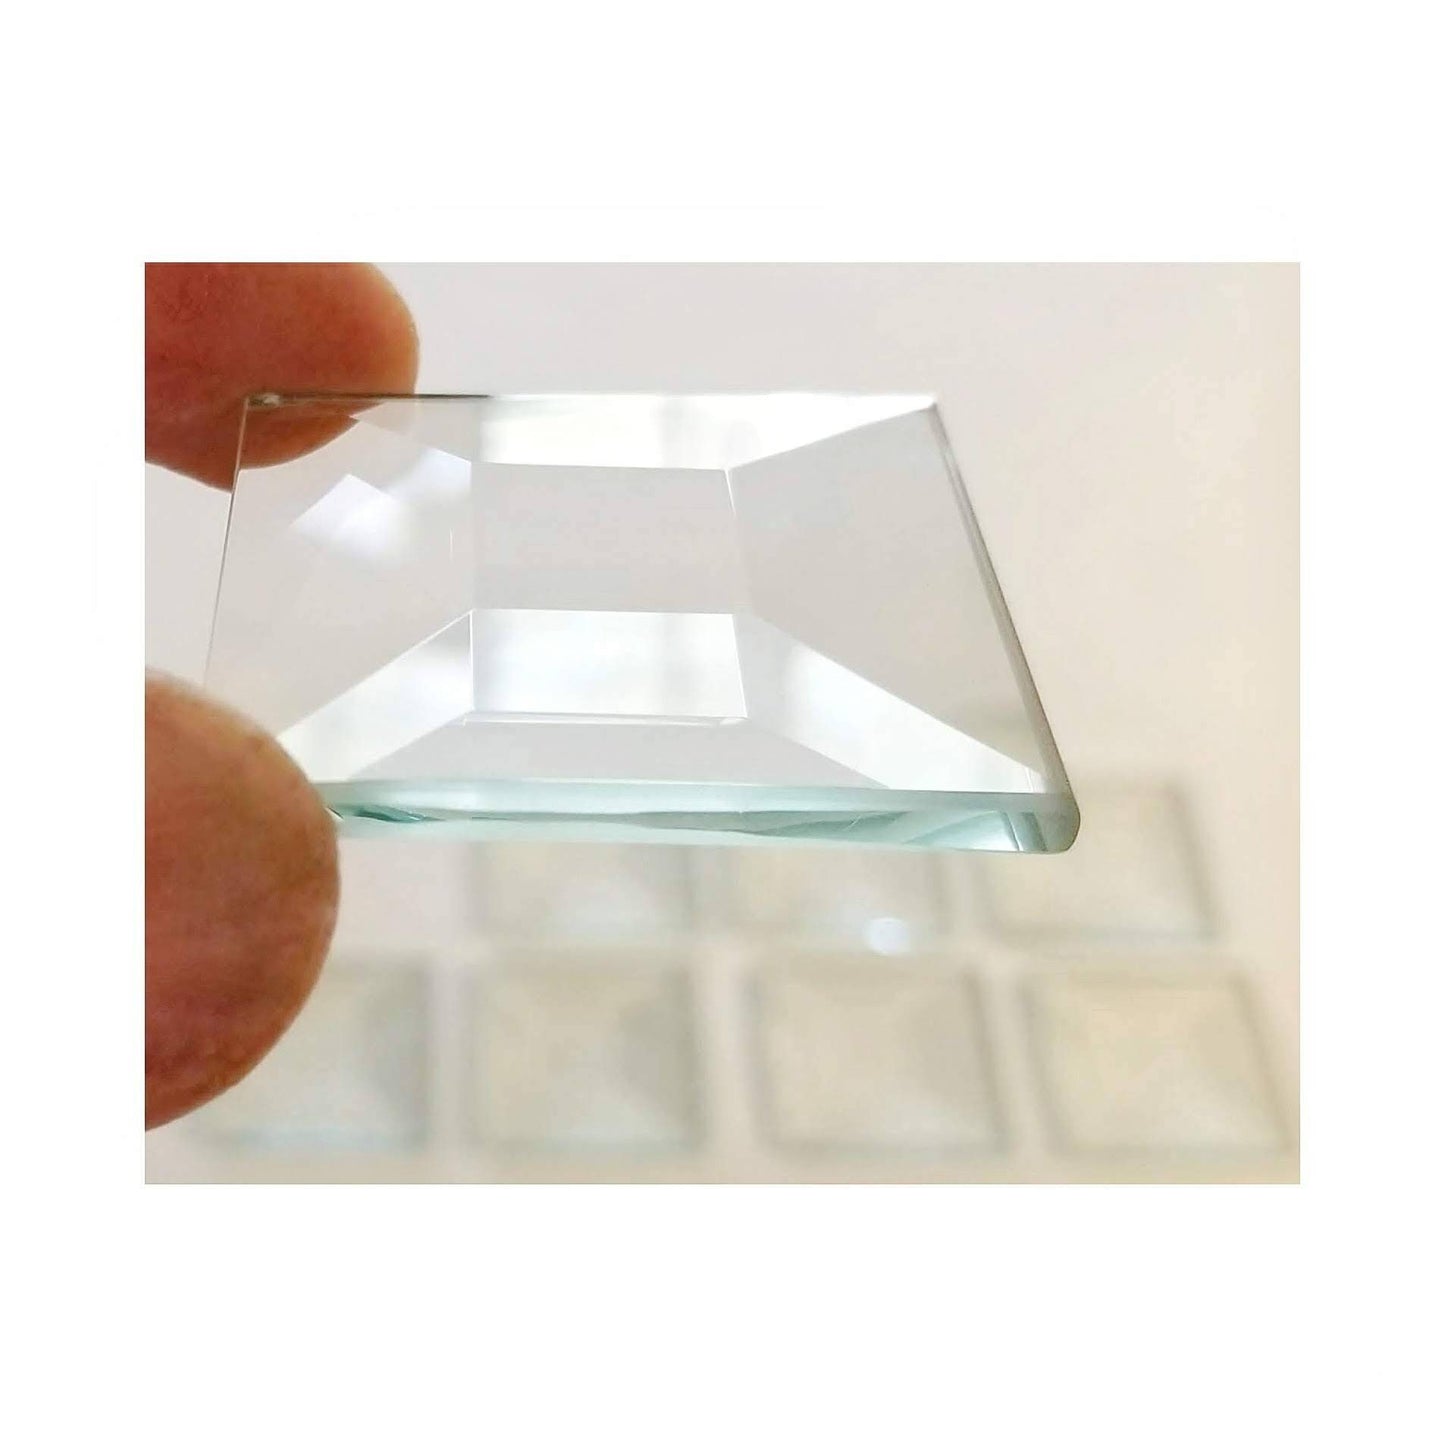 Beveled Clear Glass, 2" Squares. Create Photo Charms or Stained Glass Windows. Diy Candle Holders, Boxes & Christmas Ornaments. Set of 8